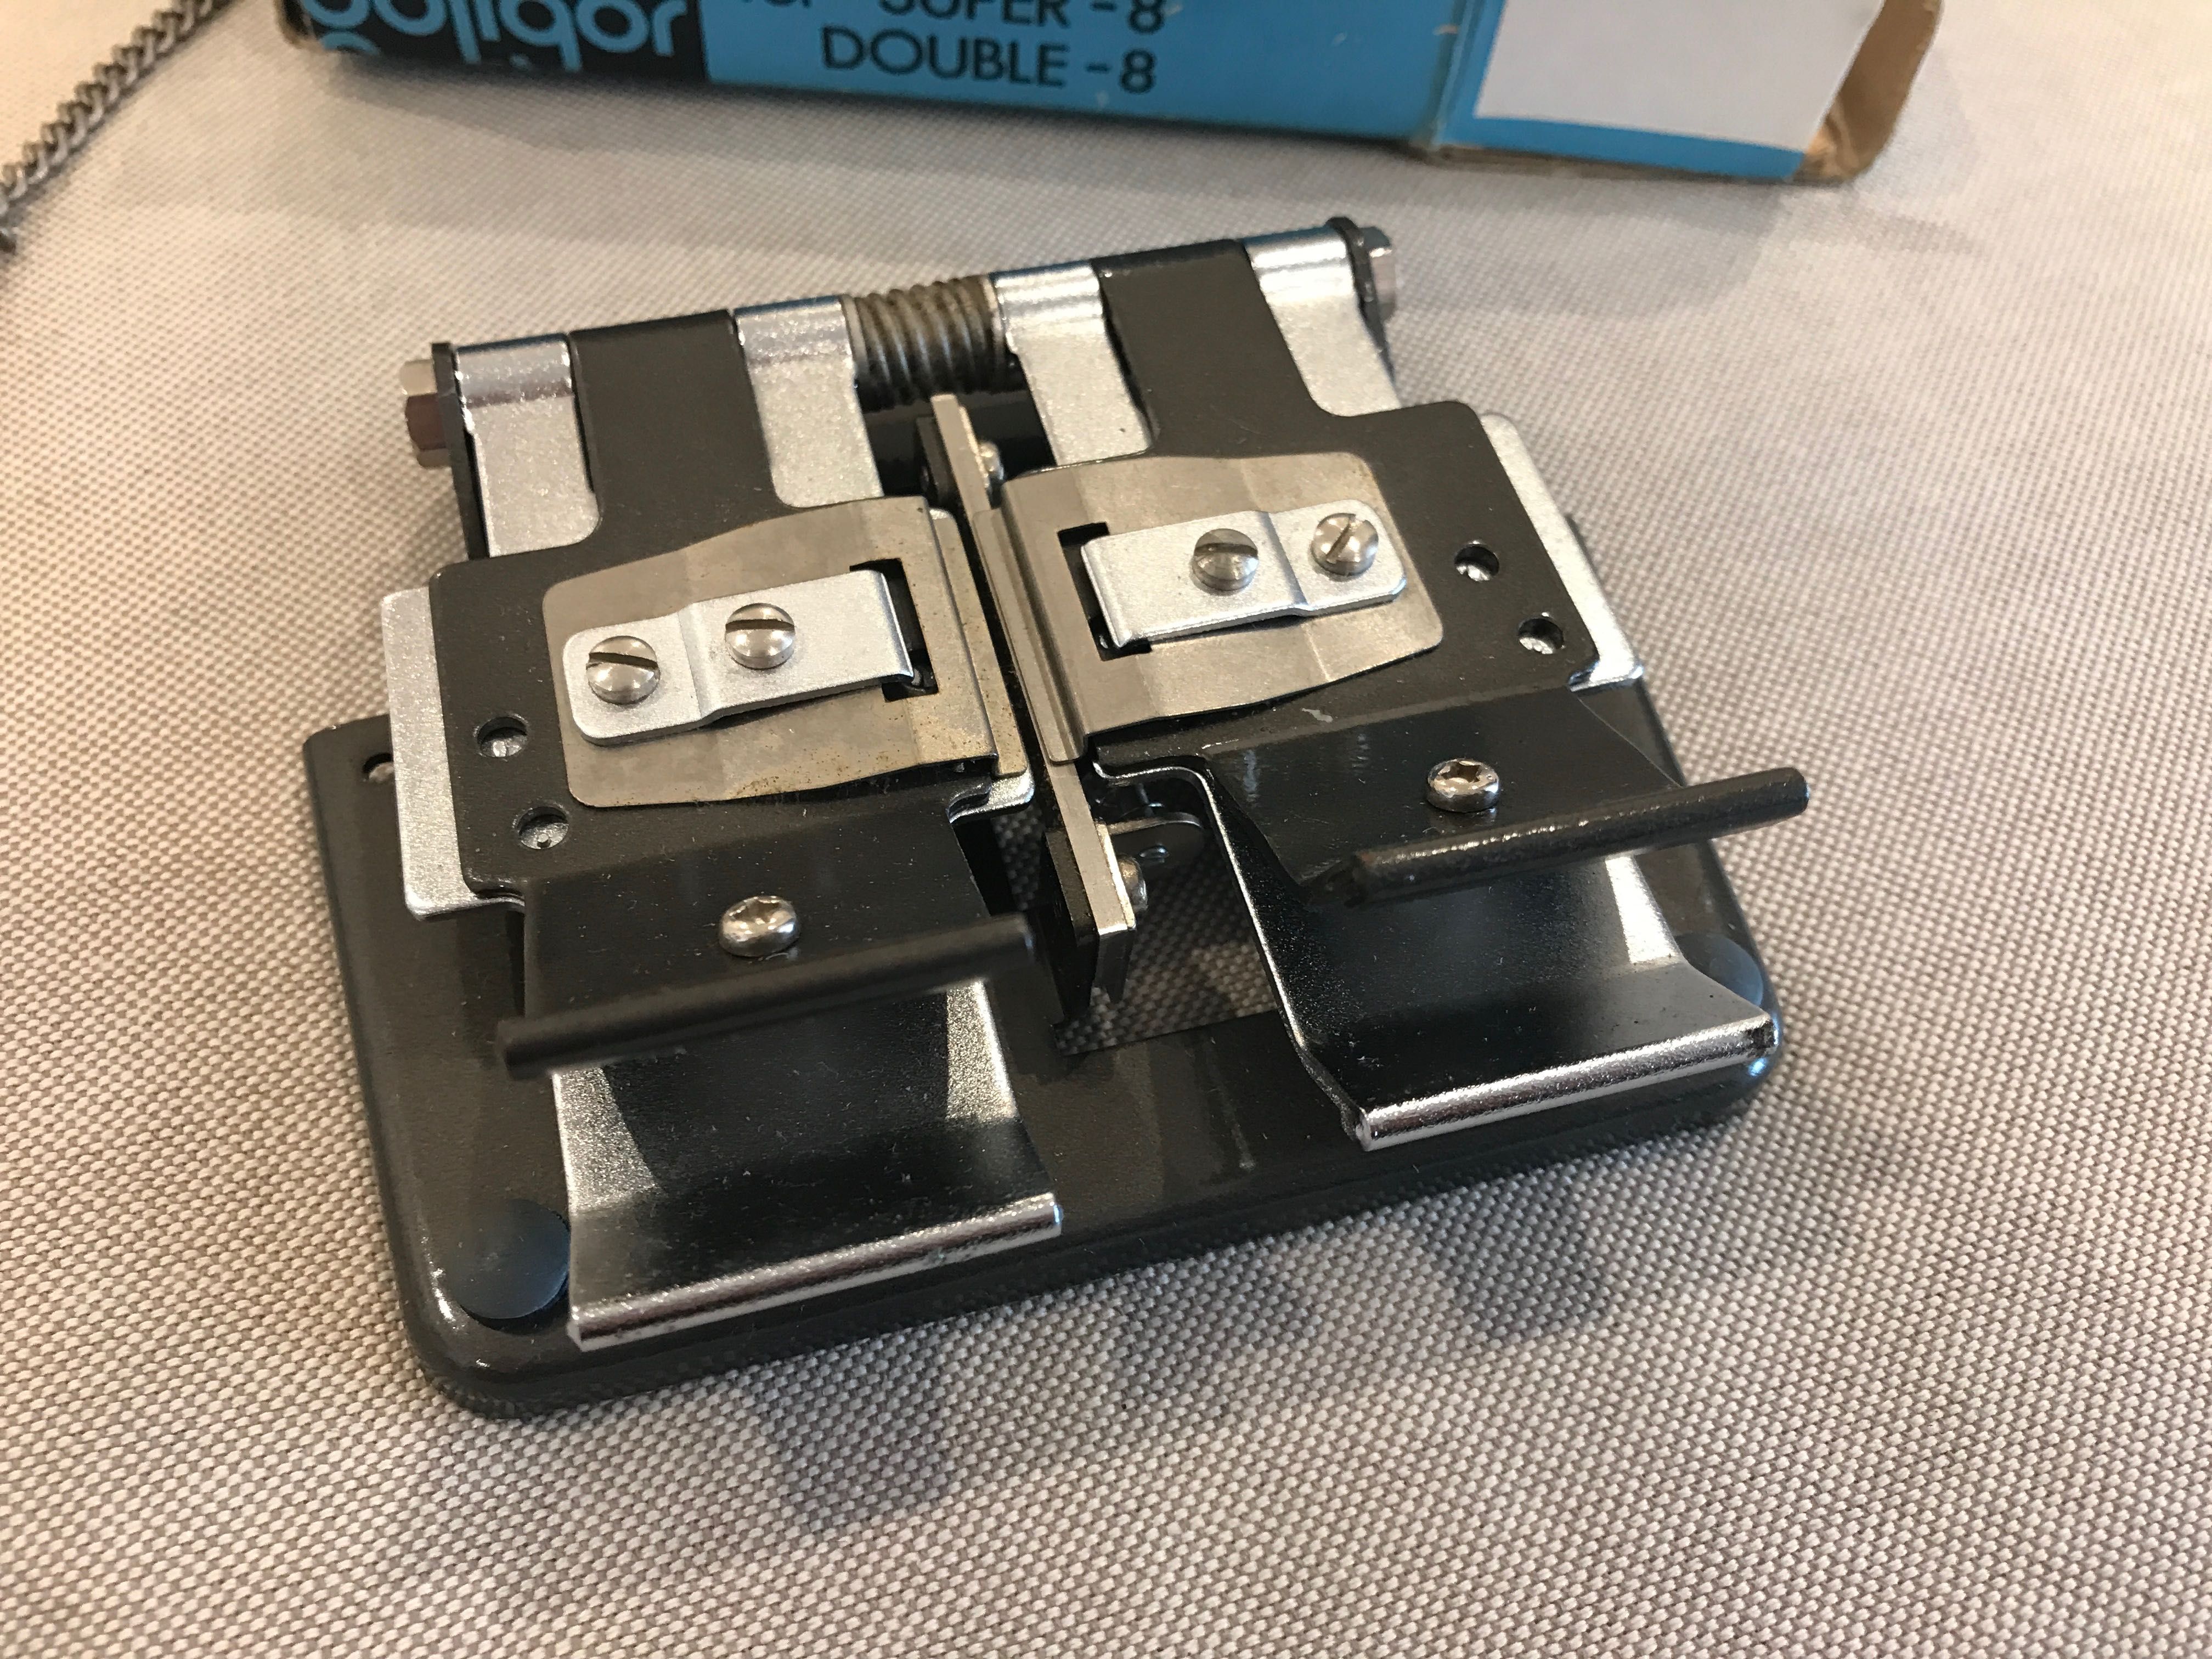 8mm SPLICER for SUPER-8 (double)